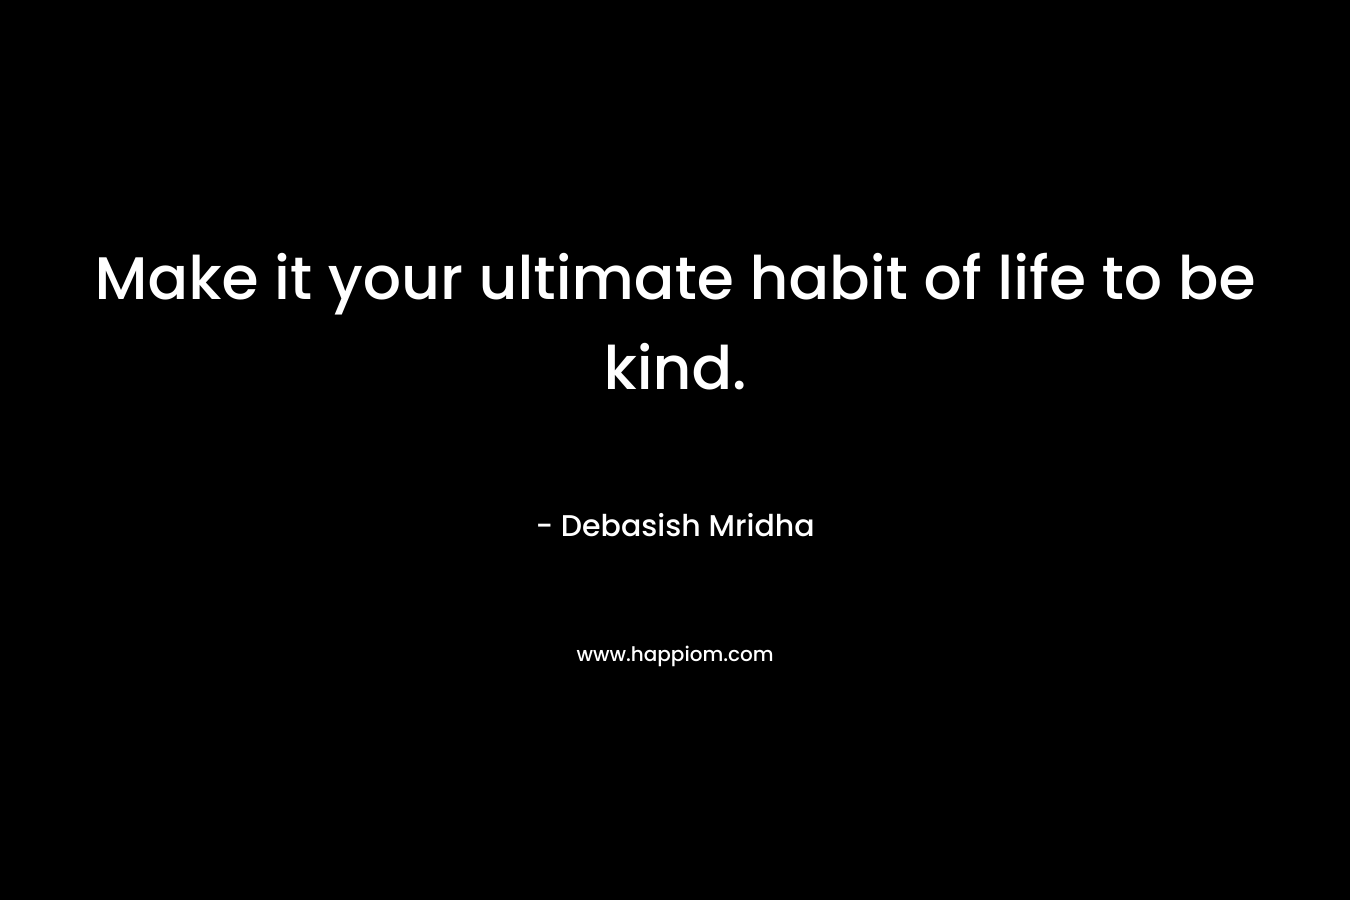 Make it your ultimate habit of life to be kind.